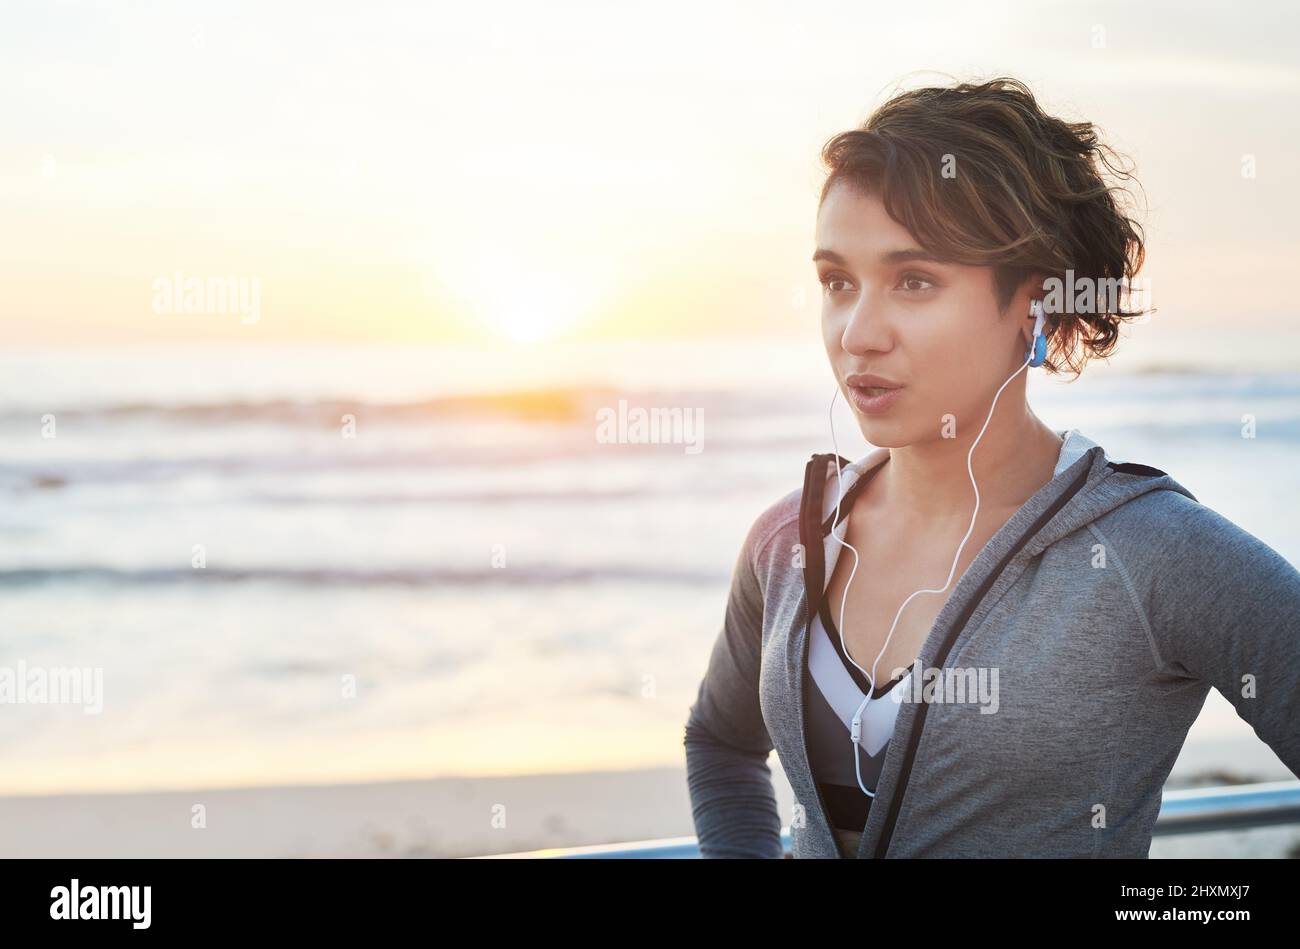 Catch your breath then chase it again. Cropped shot of a young woman wearing earphones while out for a run. Stock Photo